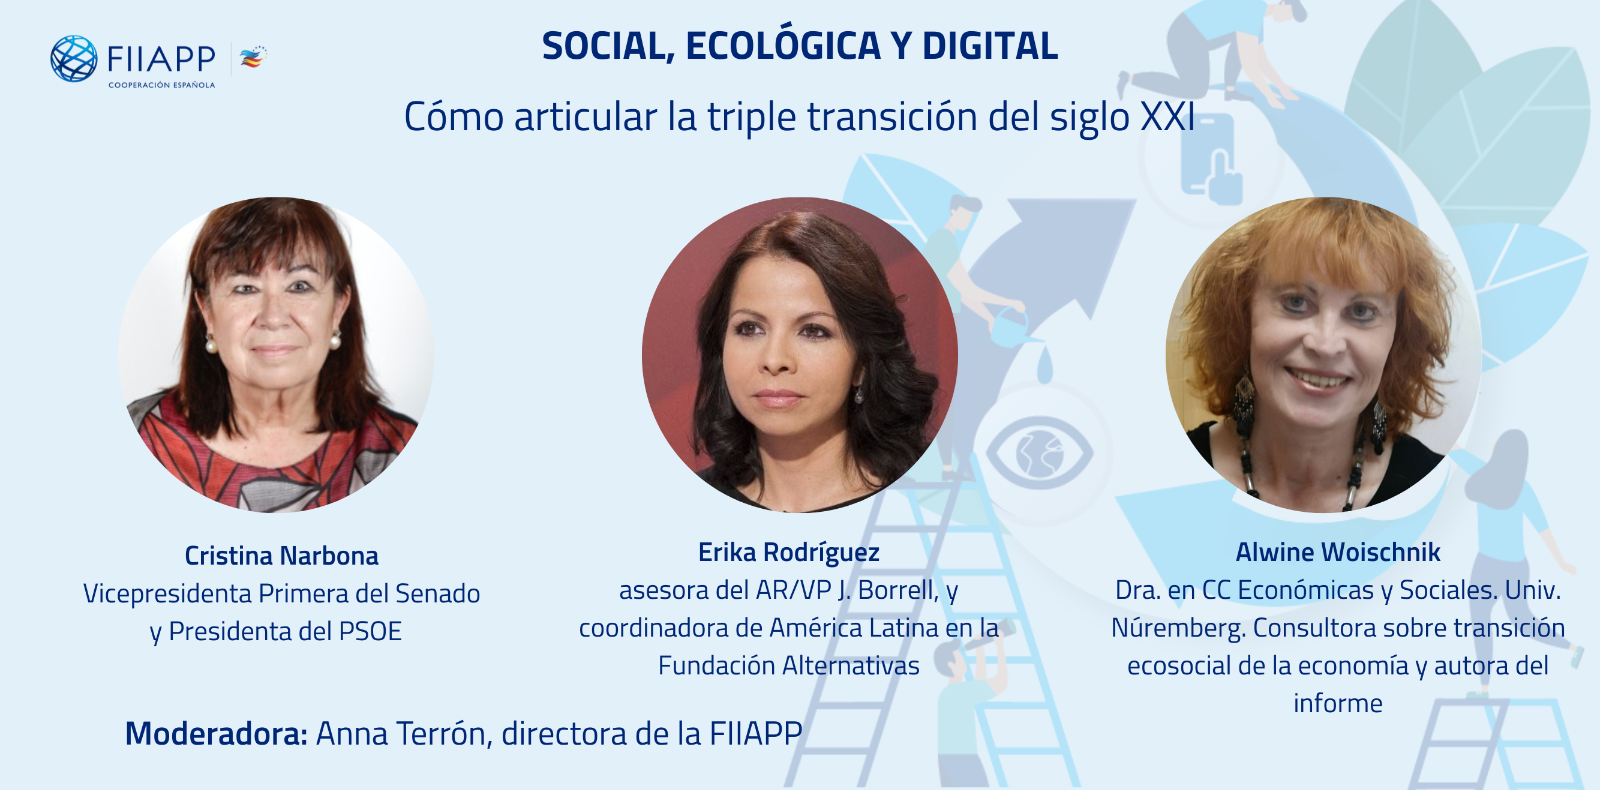 We present the report "The incipient articulation between social, ecological and digital transitions in the European Union and Latin America and the Caribbean